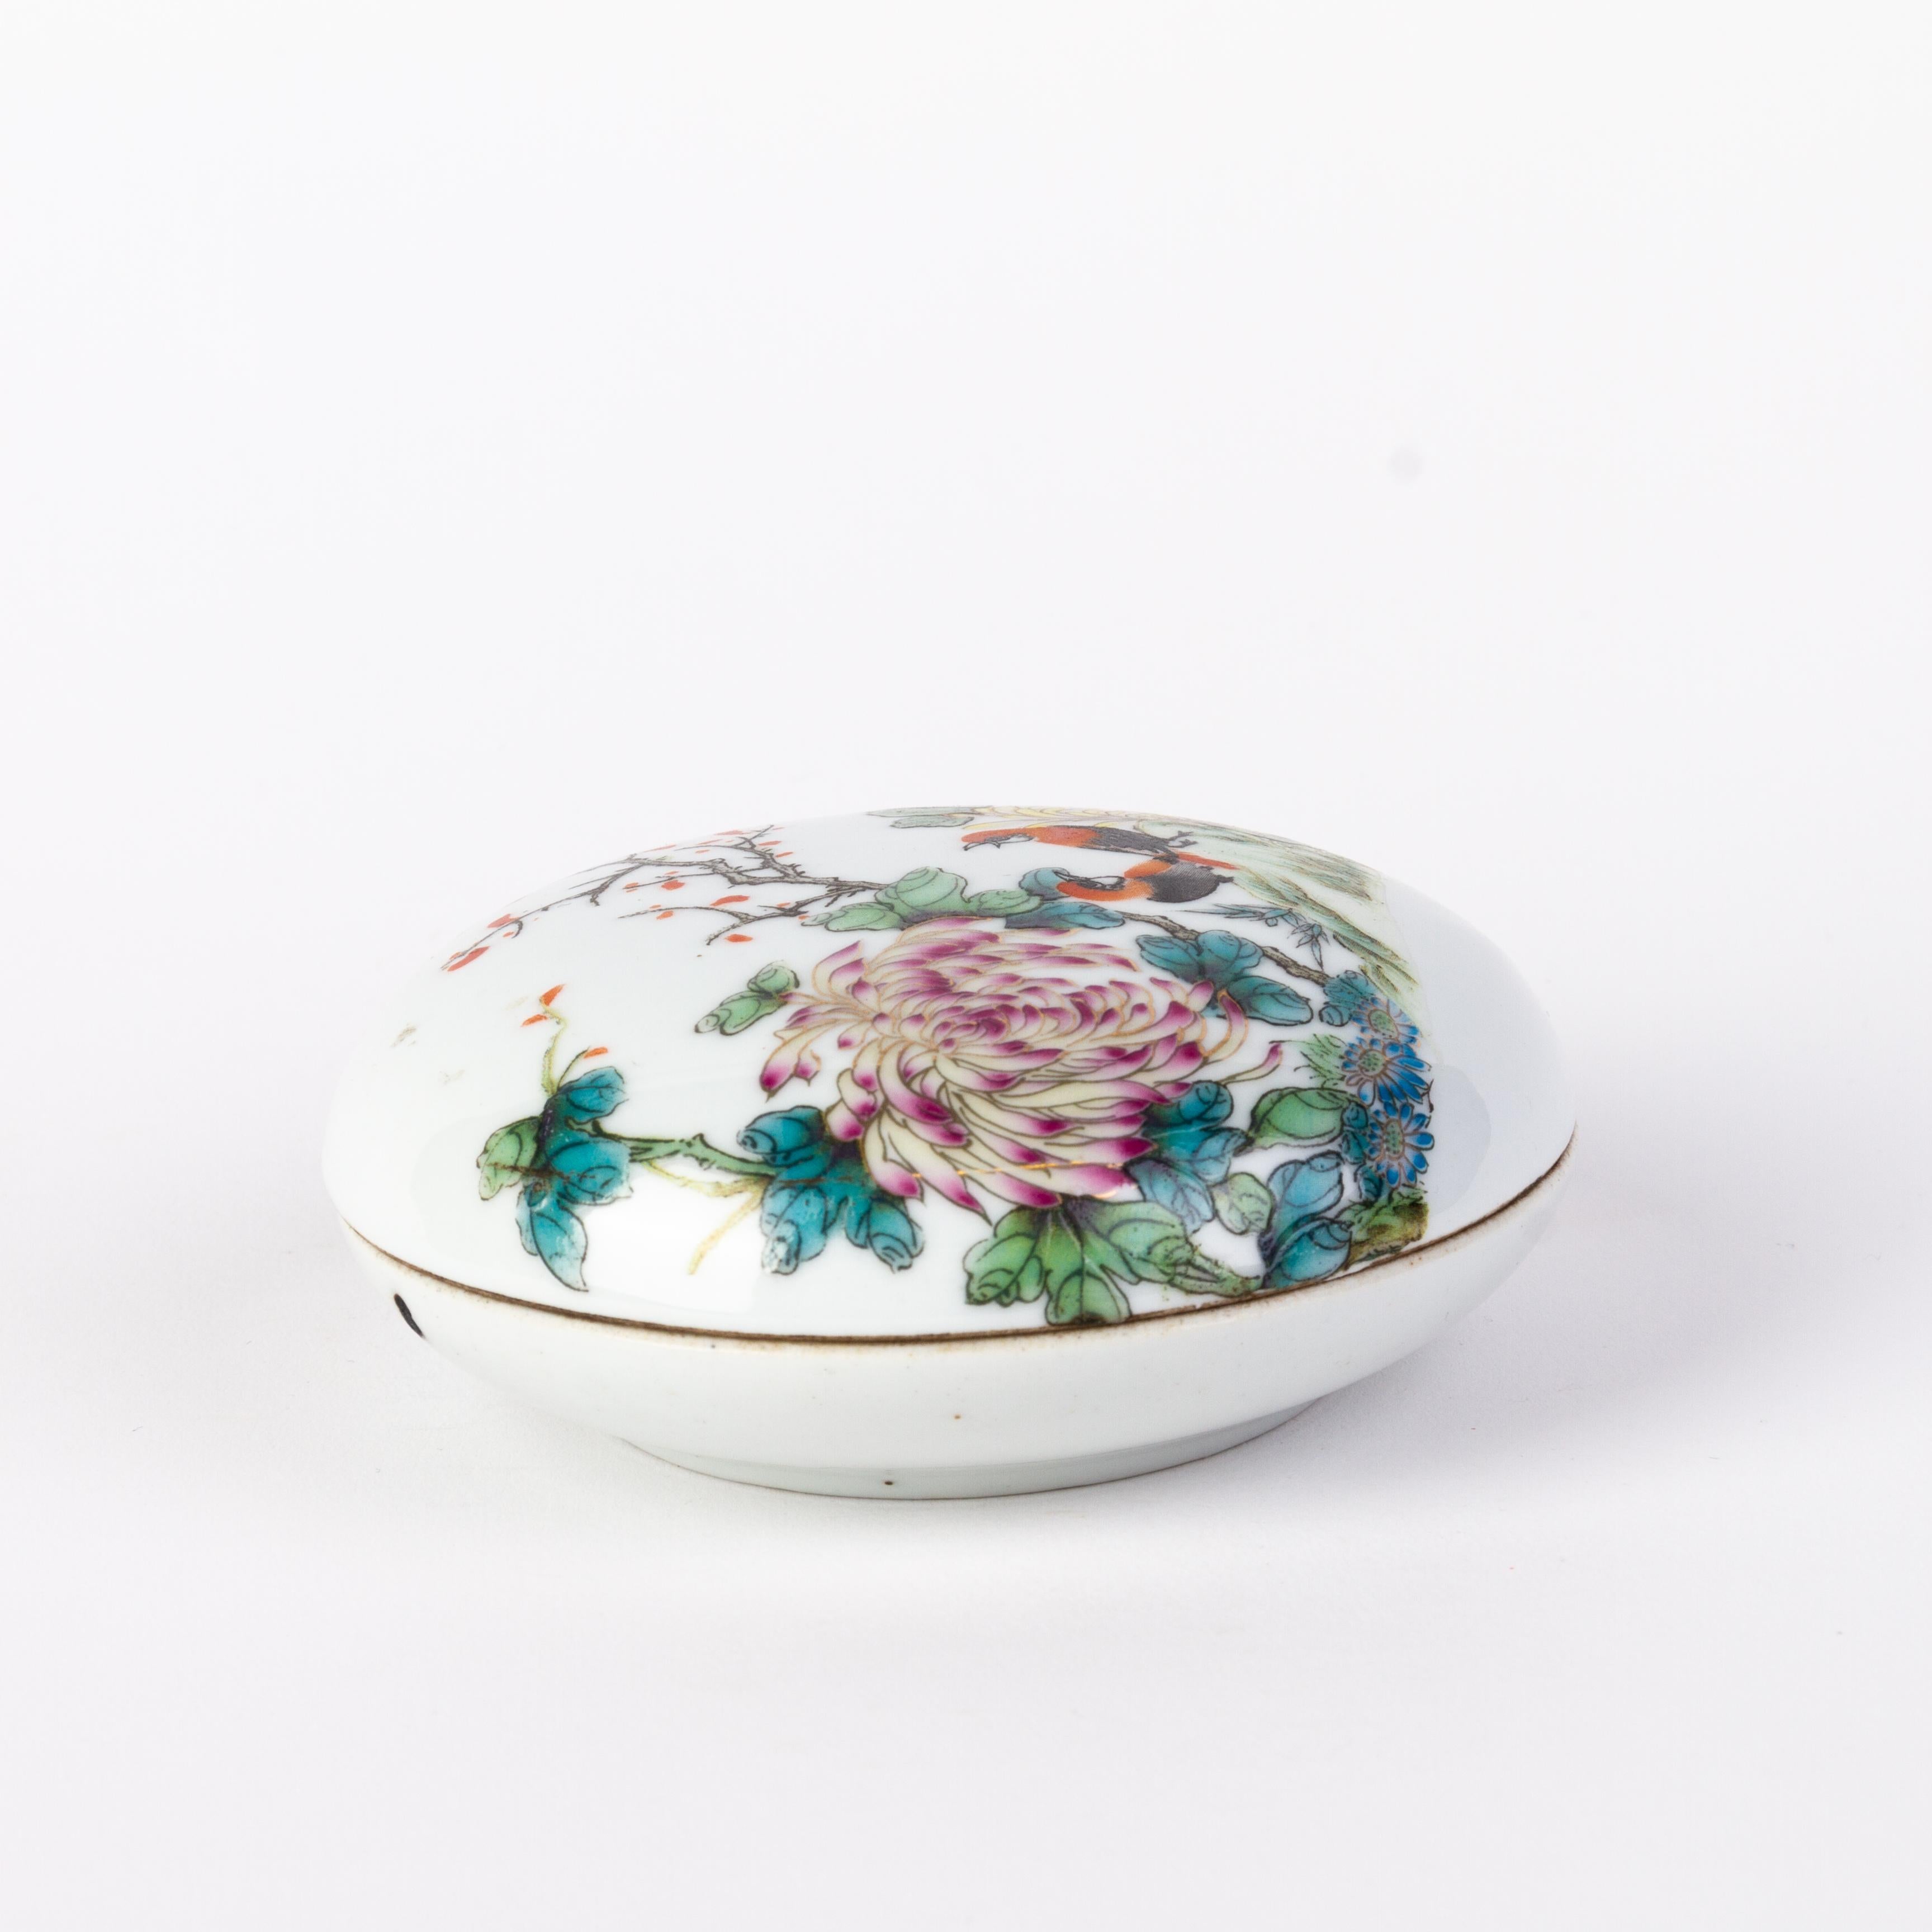 Chinese Republic Period Famille Rose Birds & Blossoms Porcelain Lidded Box 
Good condition 
From a private collection.
Free international shipping.